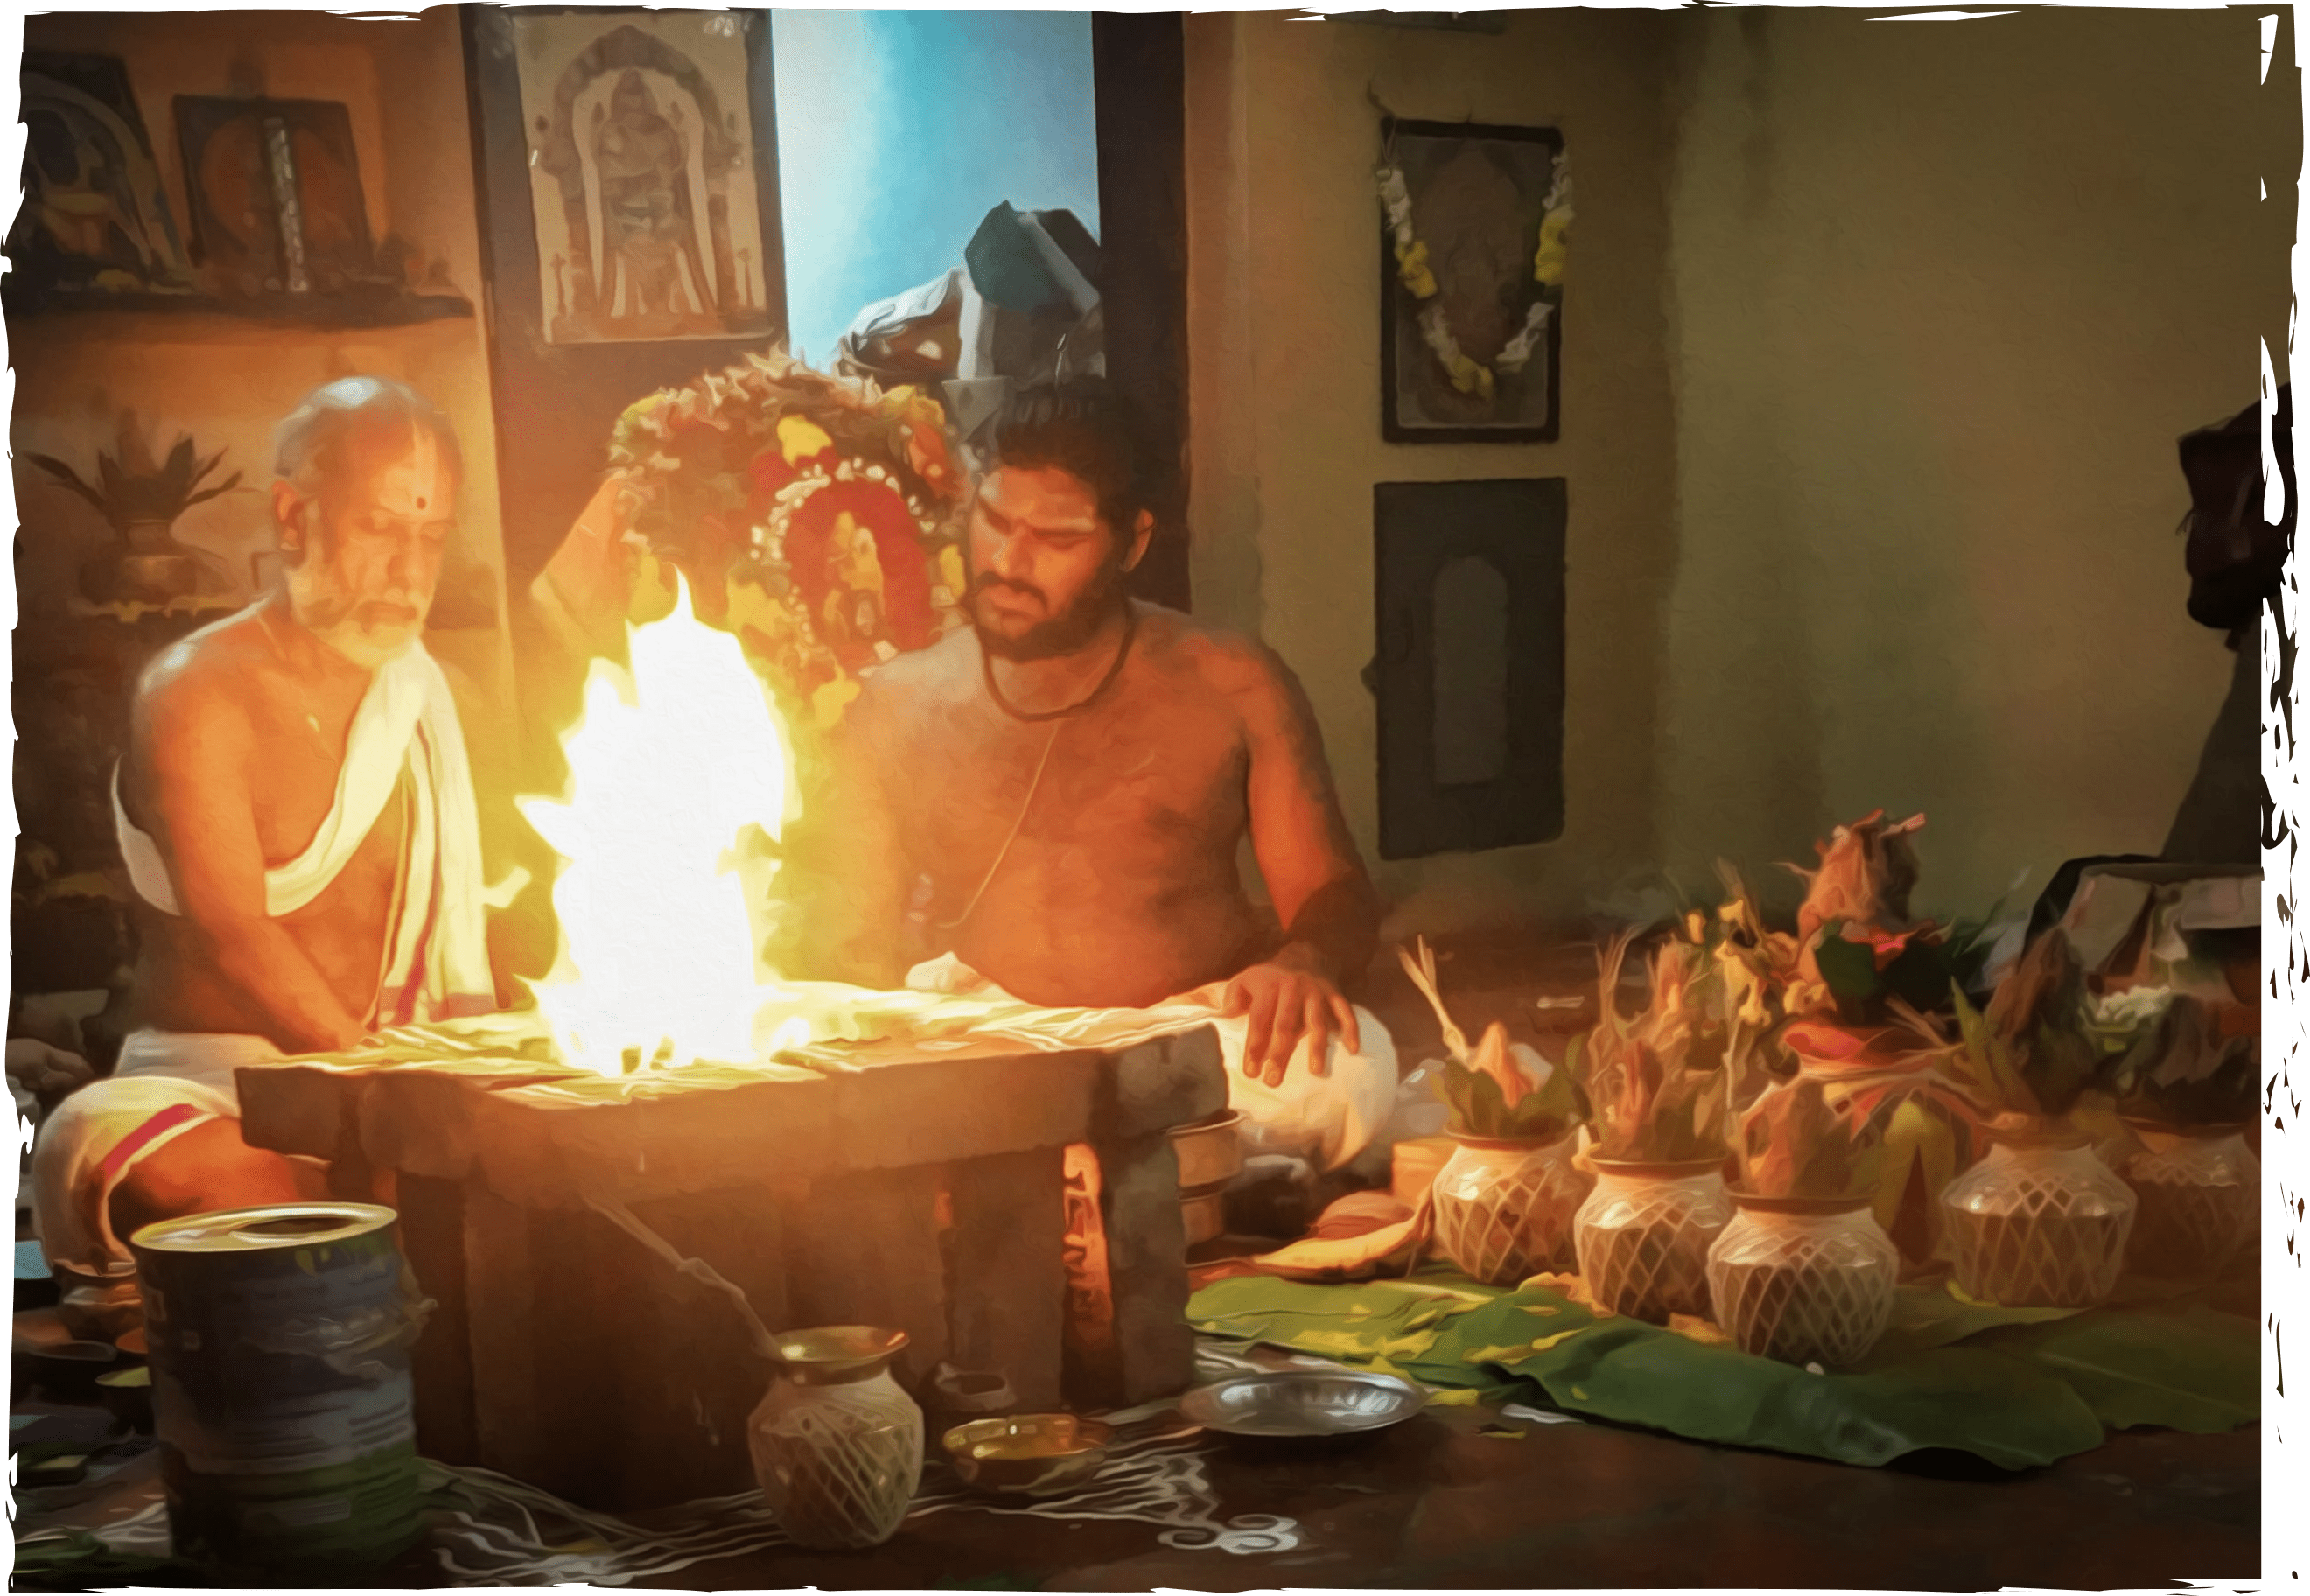 Image of two Vedic priests performing a ritual with fire and the religious items required for the ritual.